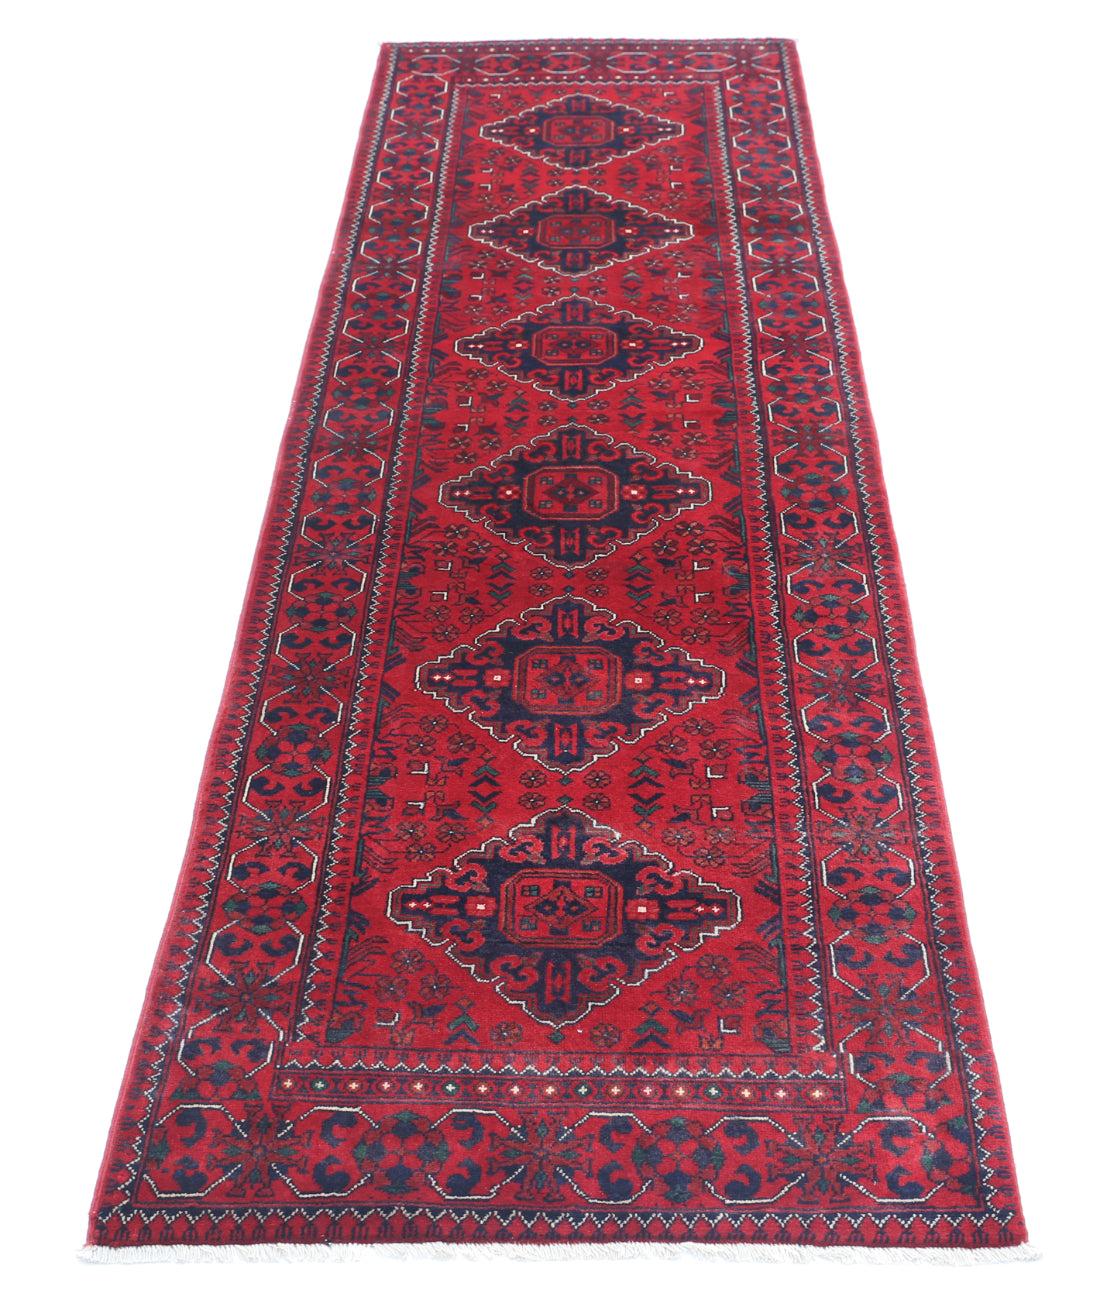 Hand Knotted Afghan Khamyab Wool Rug - 2'6'' x 9'0'' 2'6'' x 9'0'' (75 X 270) / Red / Red